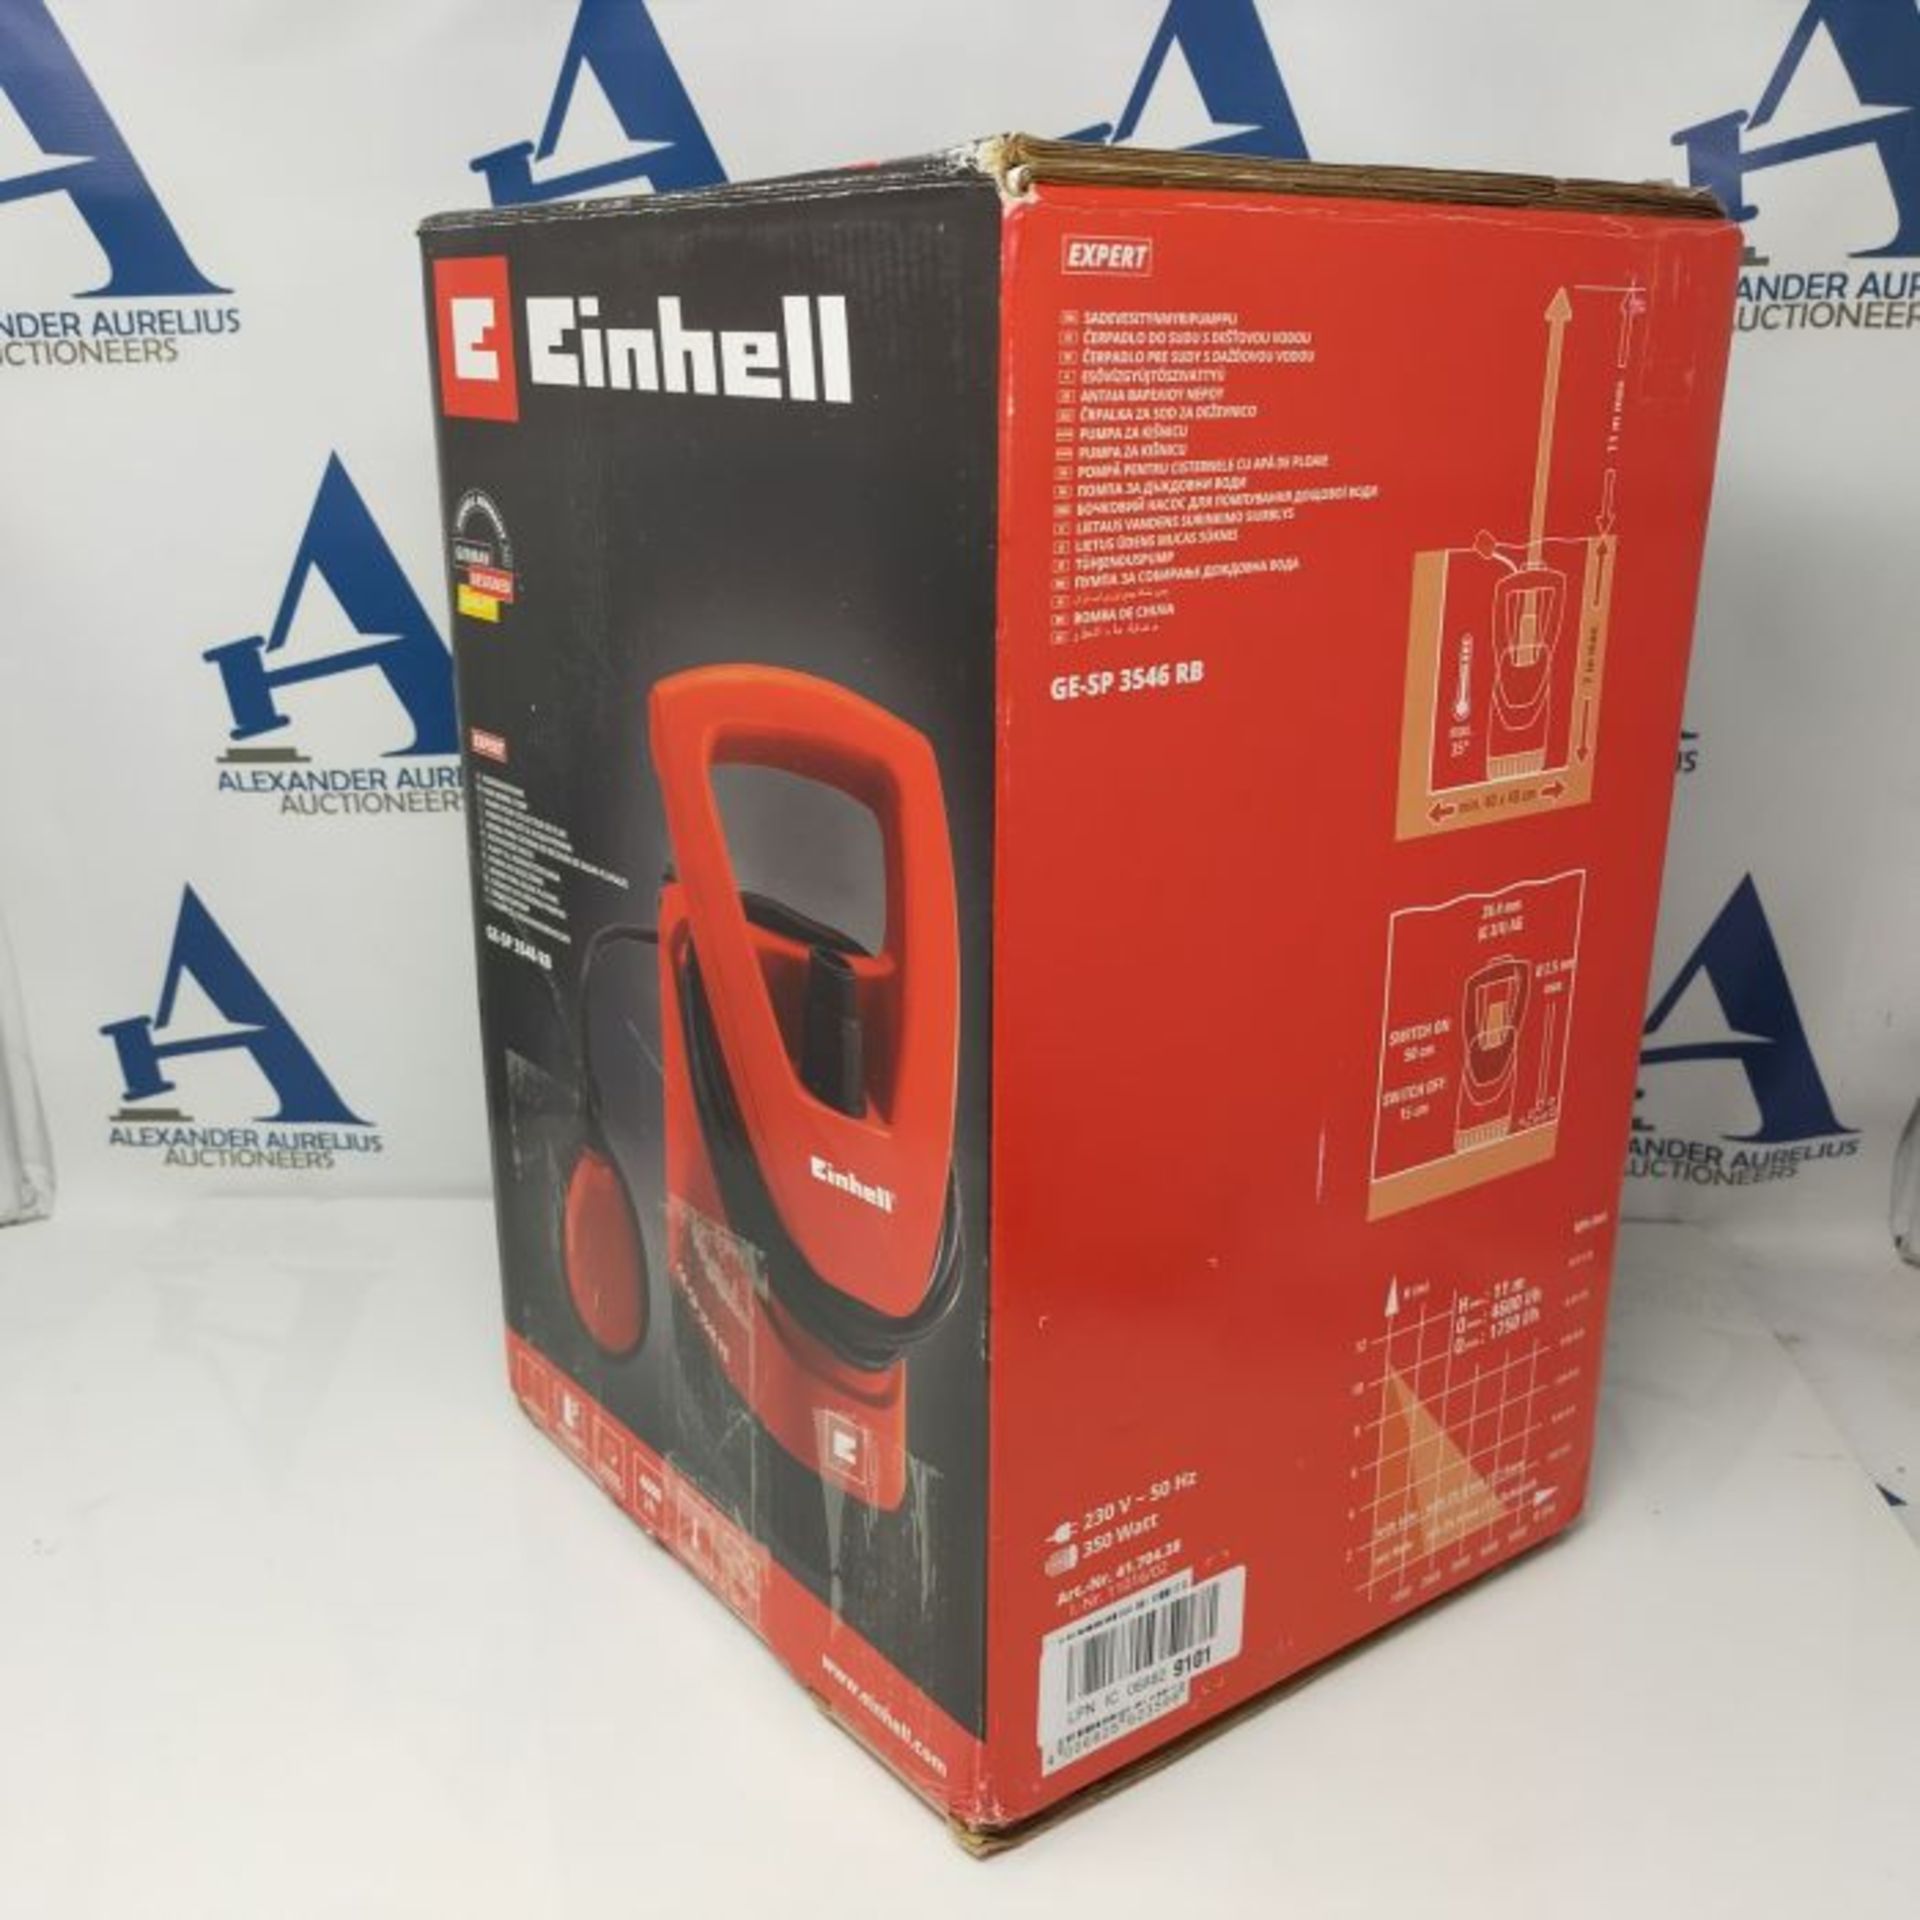 RRP £66.00 Einhell GE-SP 3546 RB Rain Barrel Pump | 350W Submersible Pump, 11m Max Immersion, 460 - Image 2 of 3